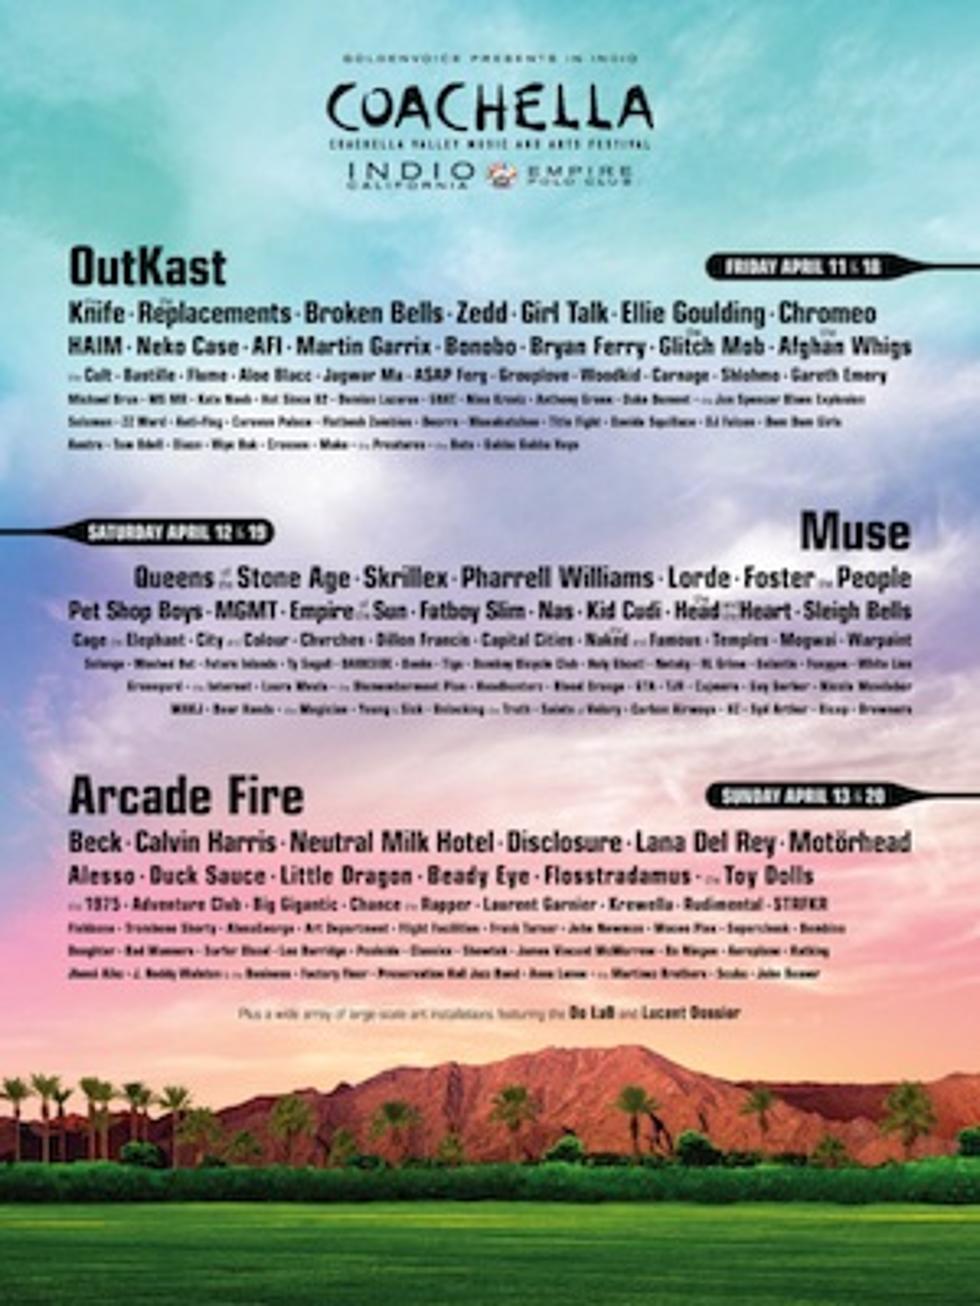 Coachella 2014 Lineup Features Motorhead, AFI, Queens of the Stone Age + More